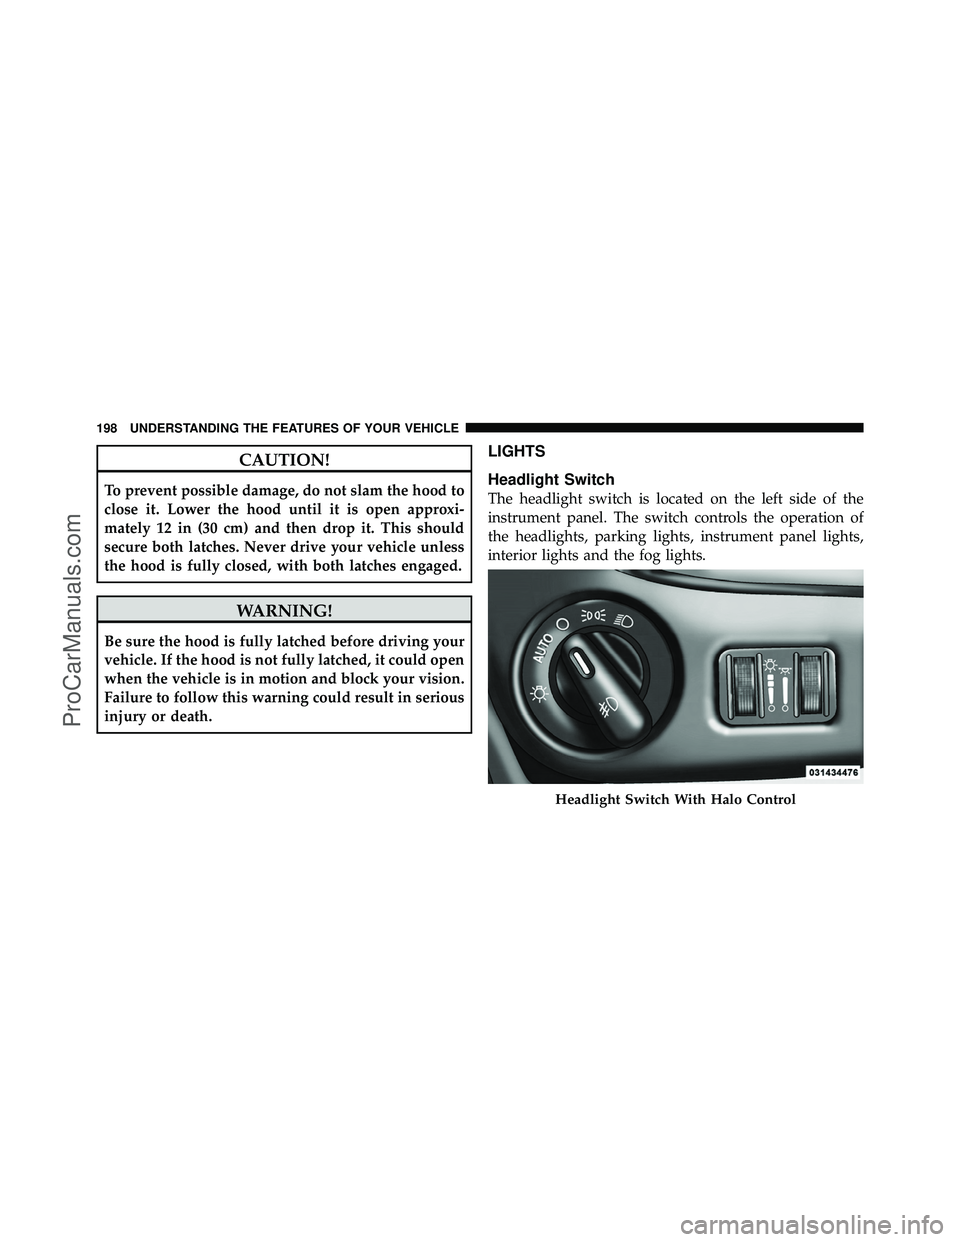 DODGE CARAVAN 2012  Owners Manual CAUTION!
To prevent possible damage, do not slam the hood to
close it. Lower the hood until it is open approxi-
mately 12 in (30 cm) and then drop it. This should
secure both latches. Never drive your